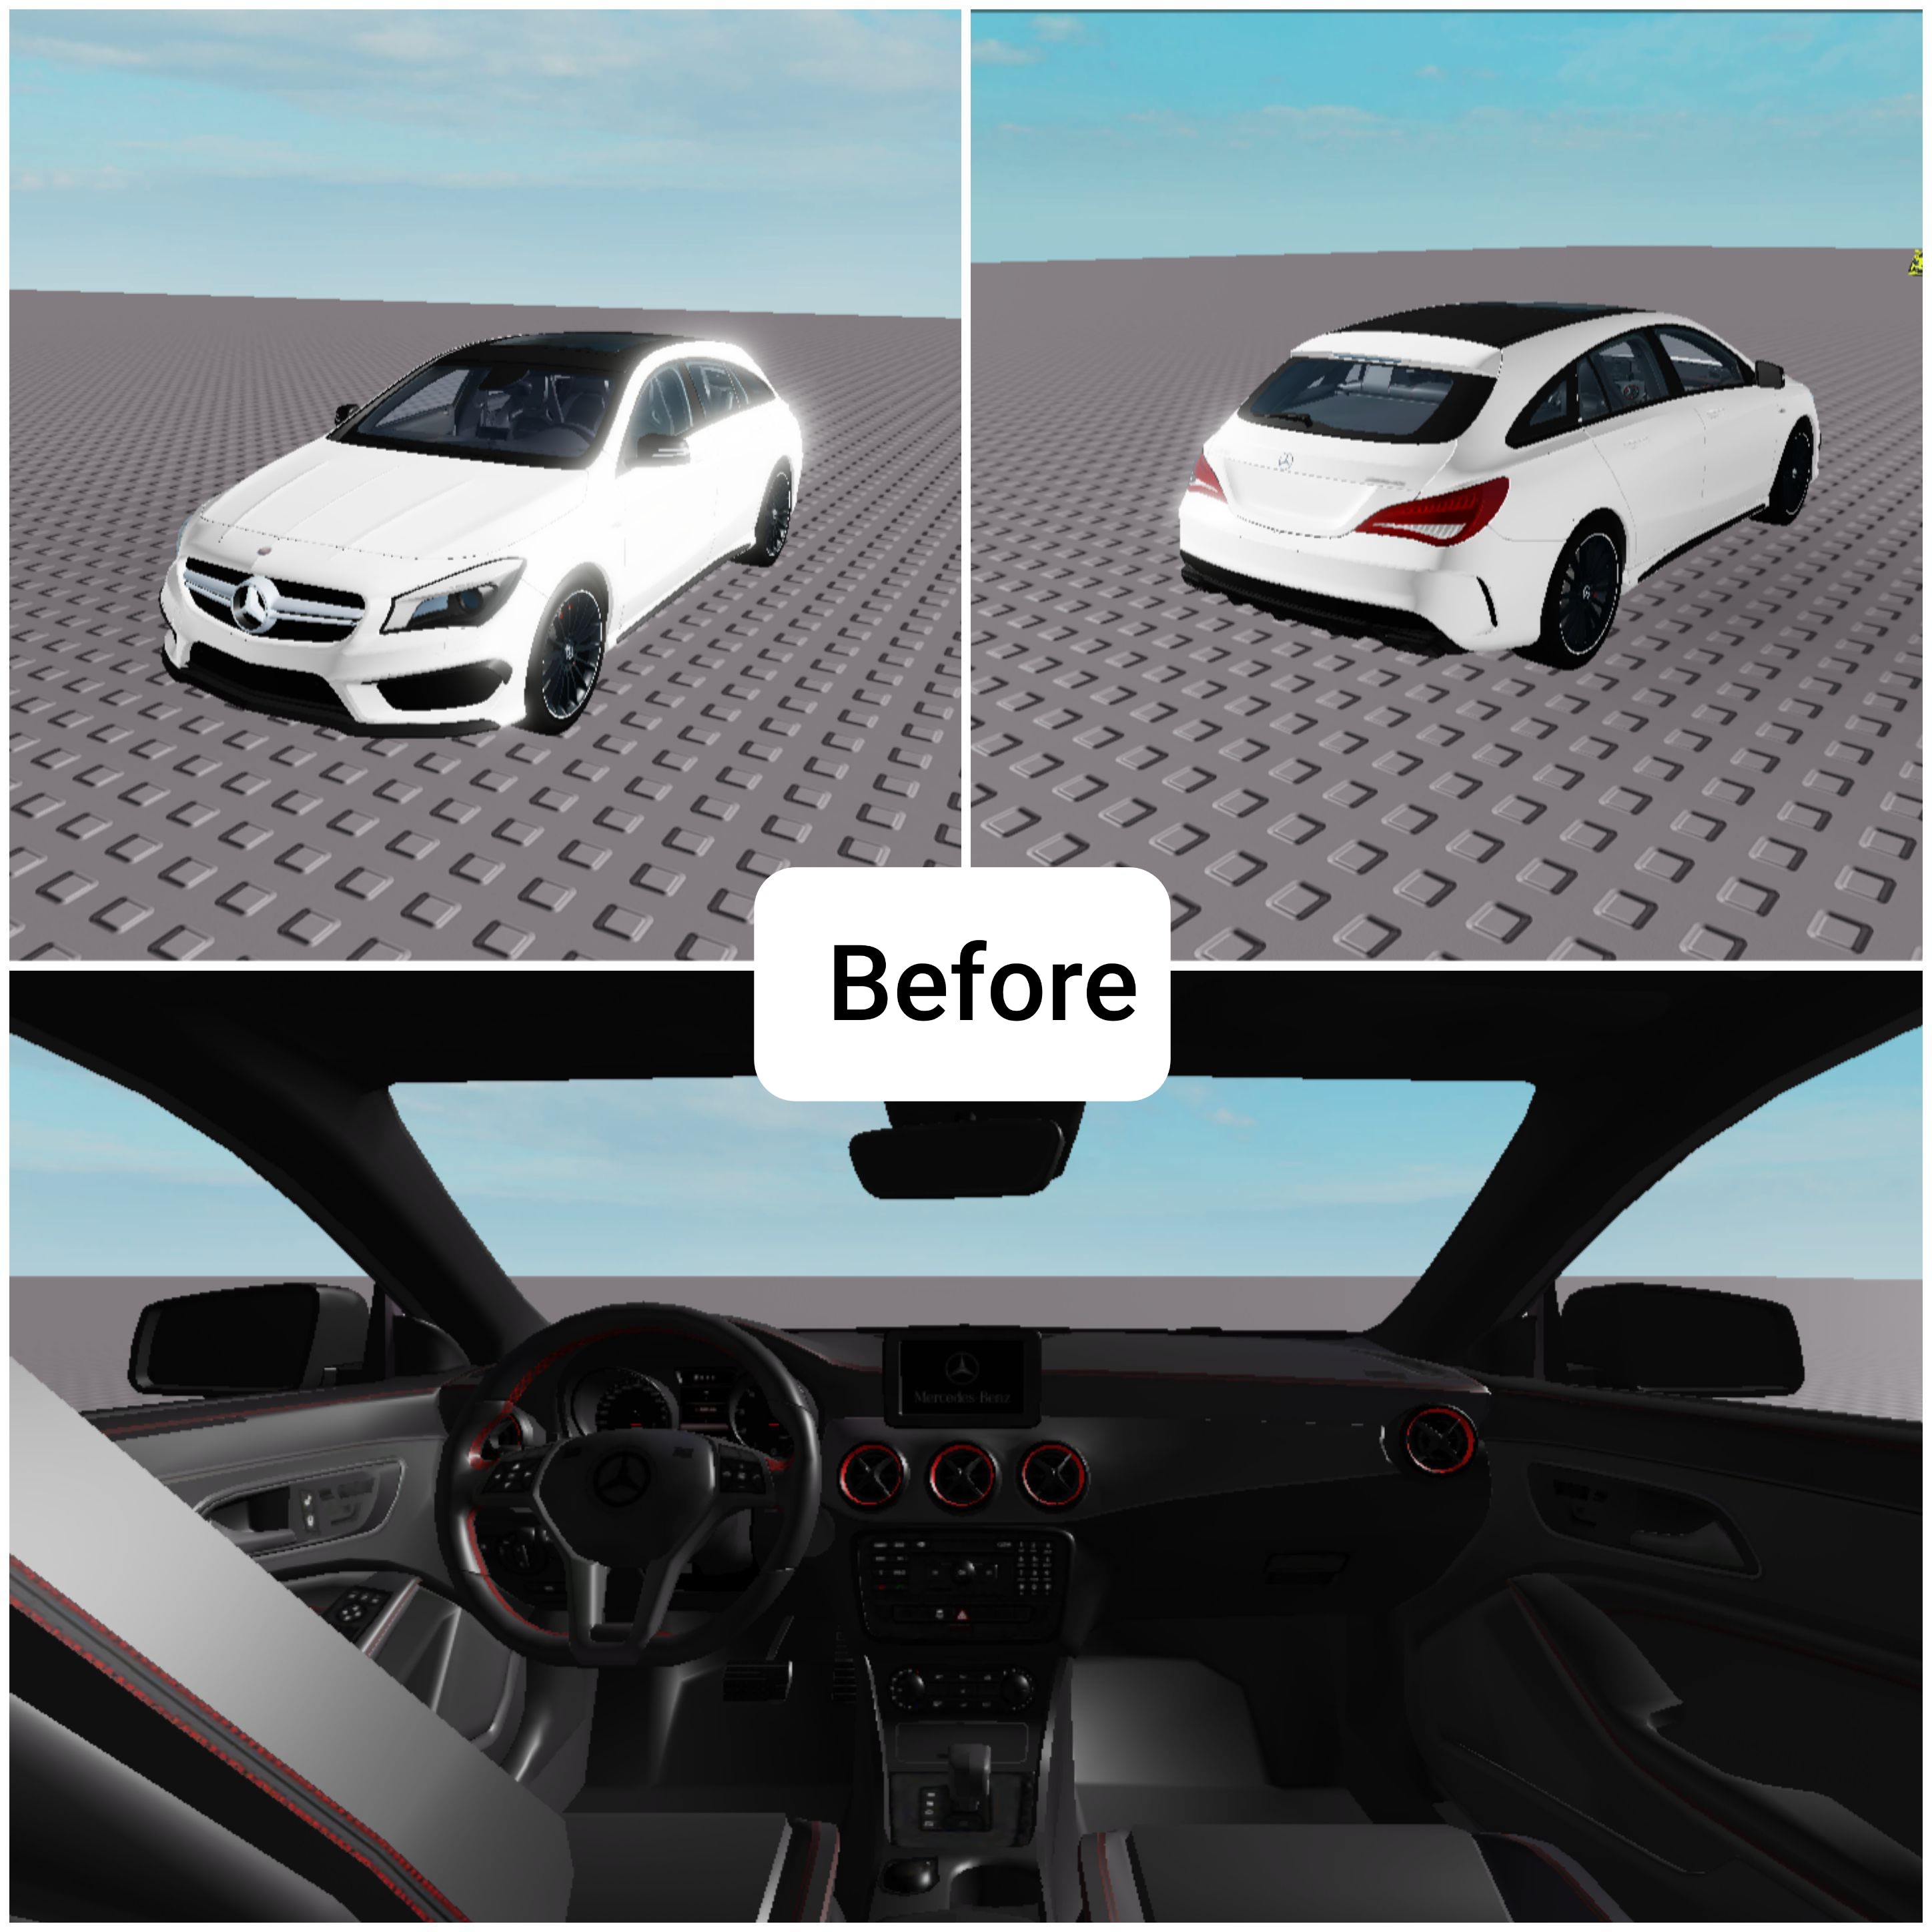 Modify Your Car Model In Roblox Studio With The Specifications You Desire By Sebastian Yeong - best mates roblox